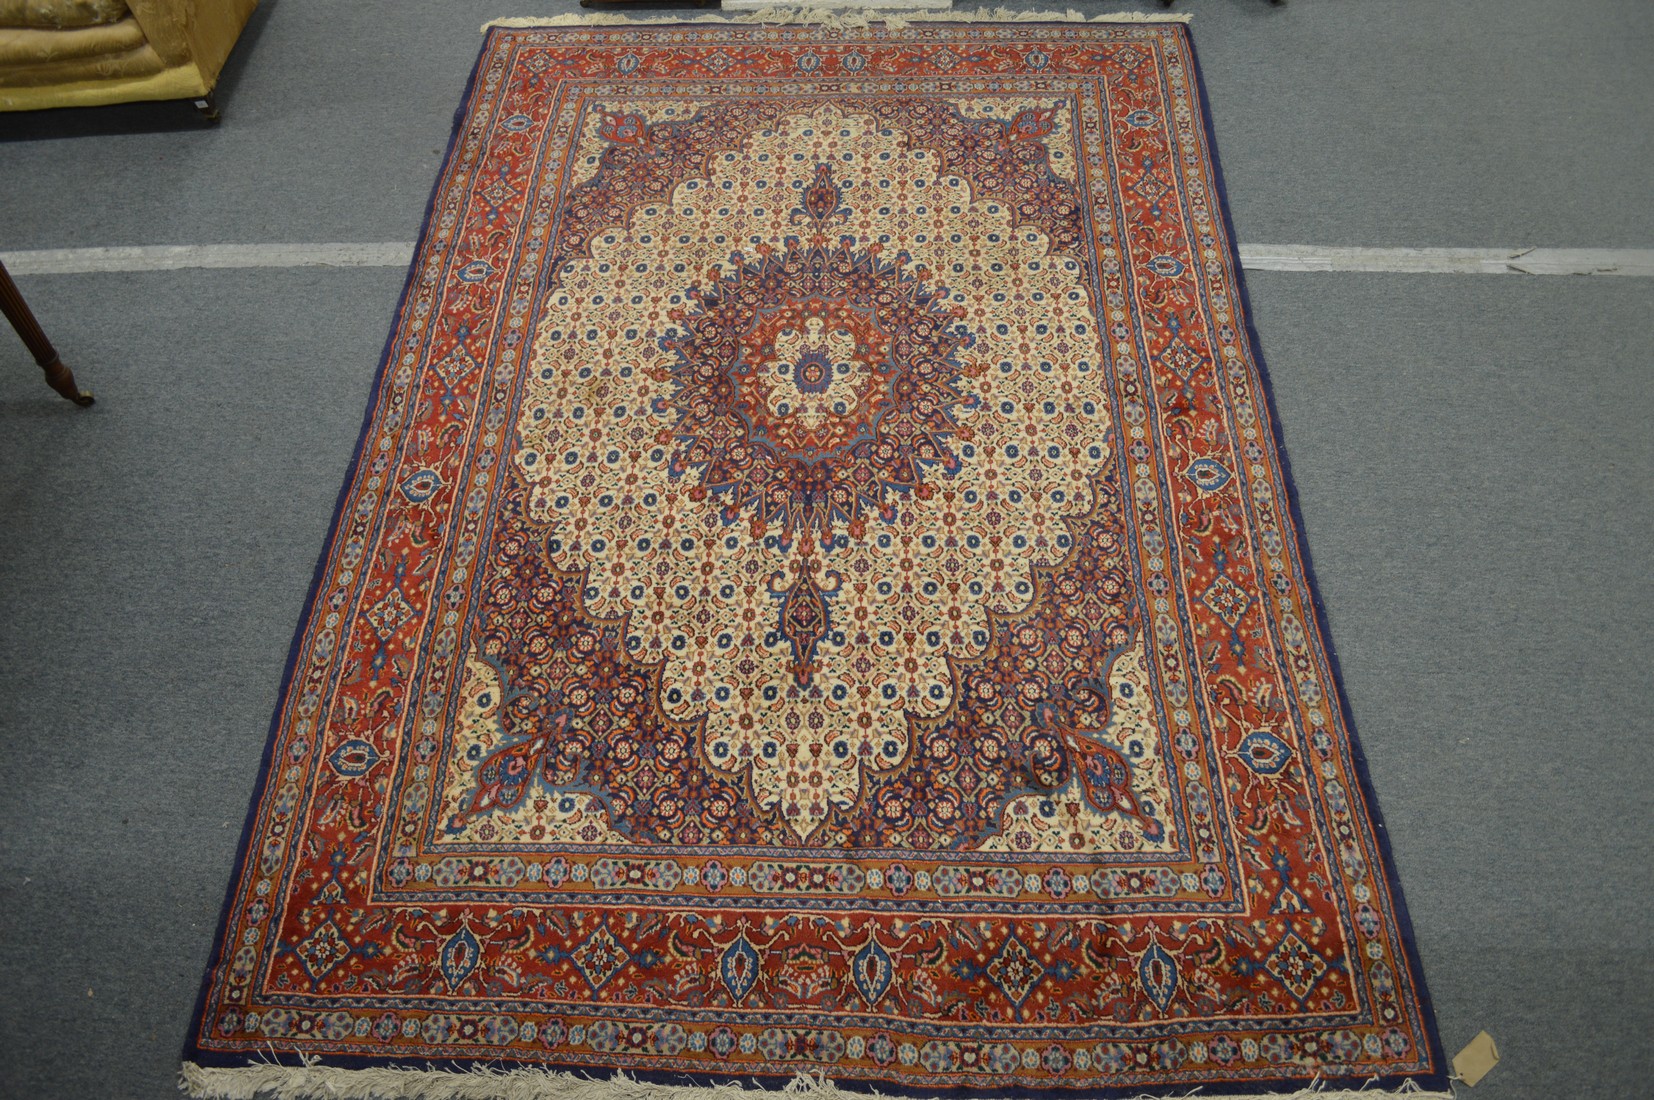 A PERSIAN CARPET, cream ground with floral decoration. 9ft 6ins x 6ft 8ins.